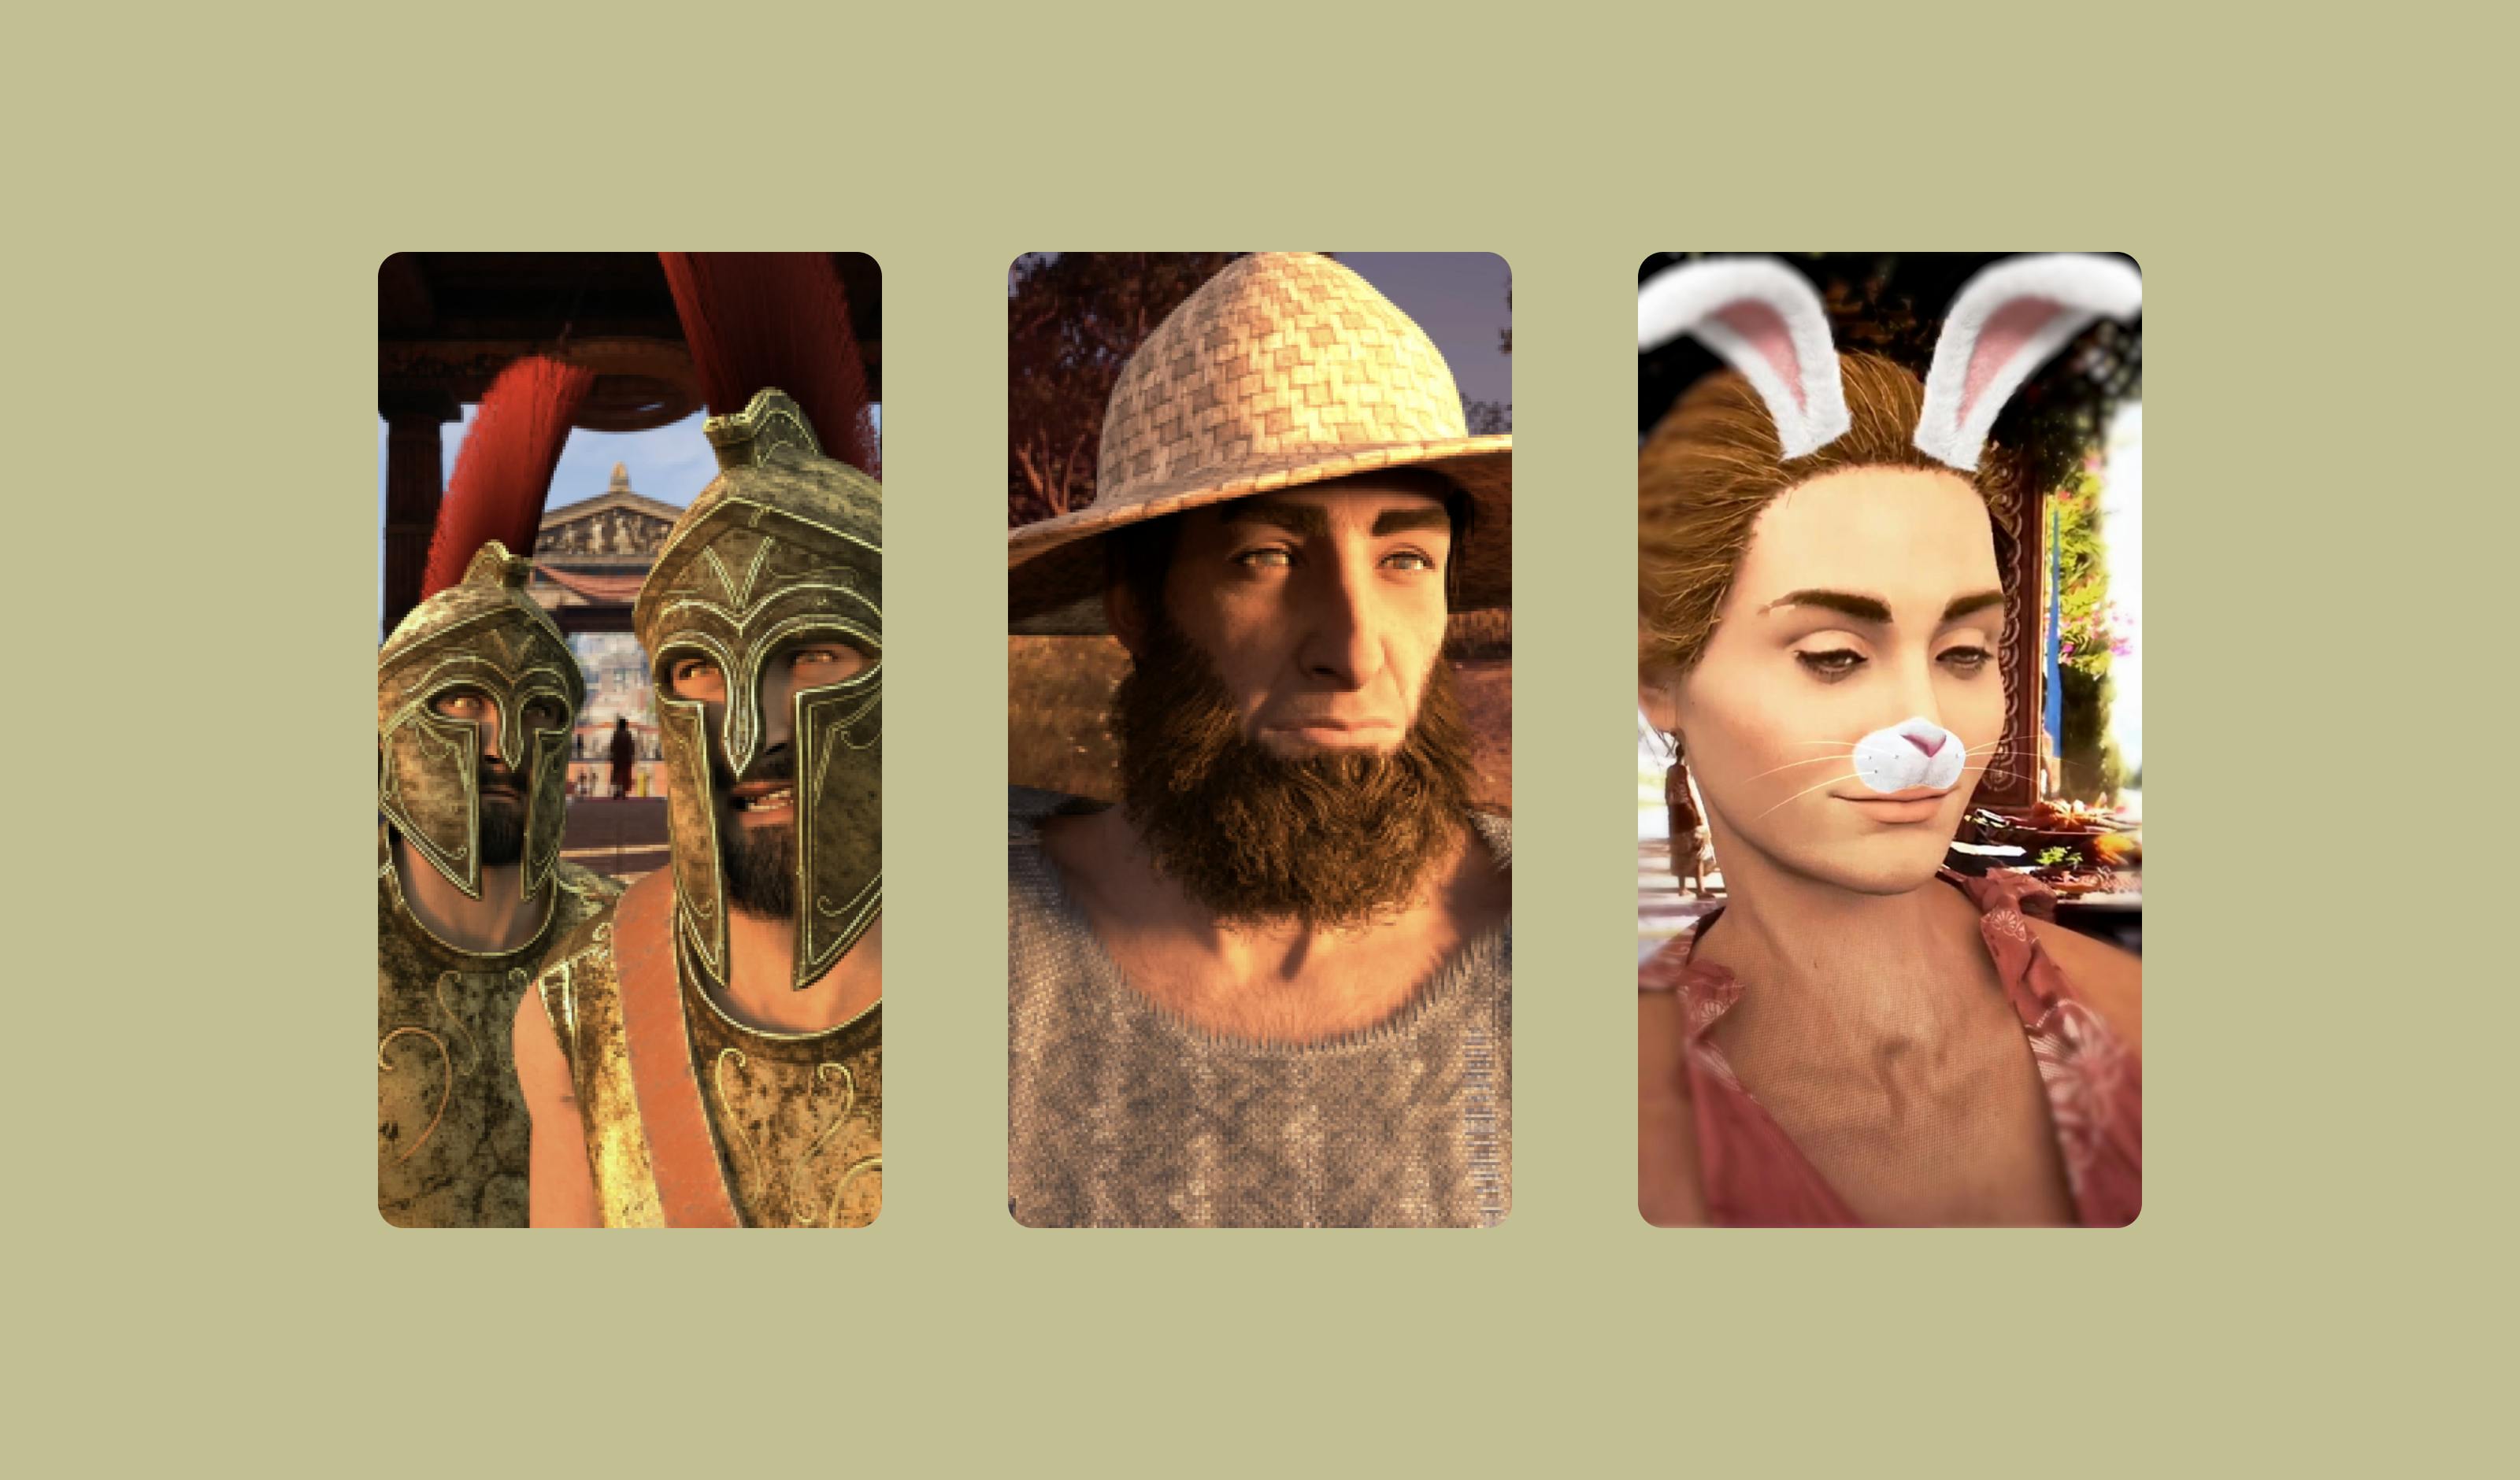 3 pictures of non-playable characters in Assassin's Creed Odyssey